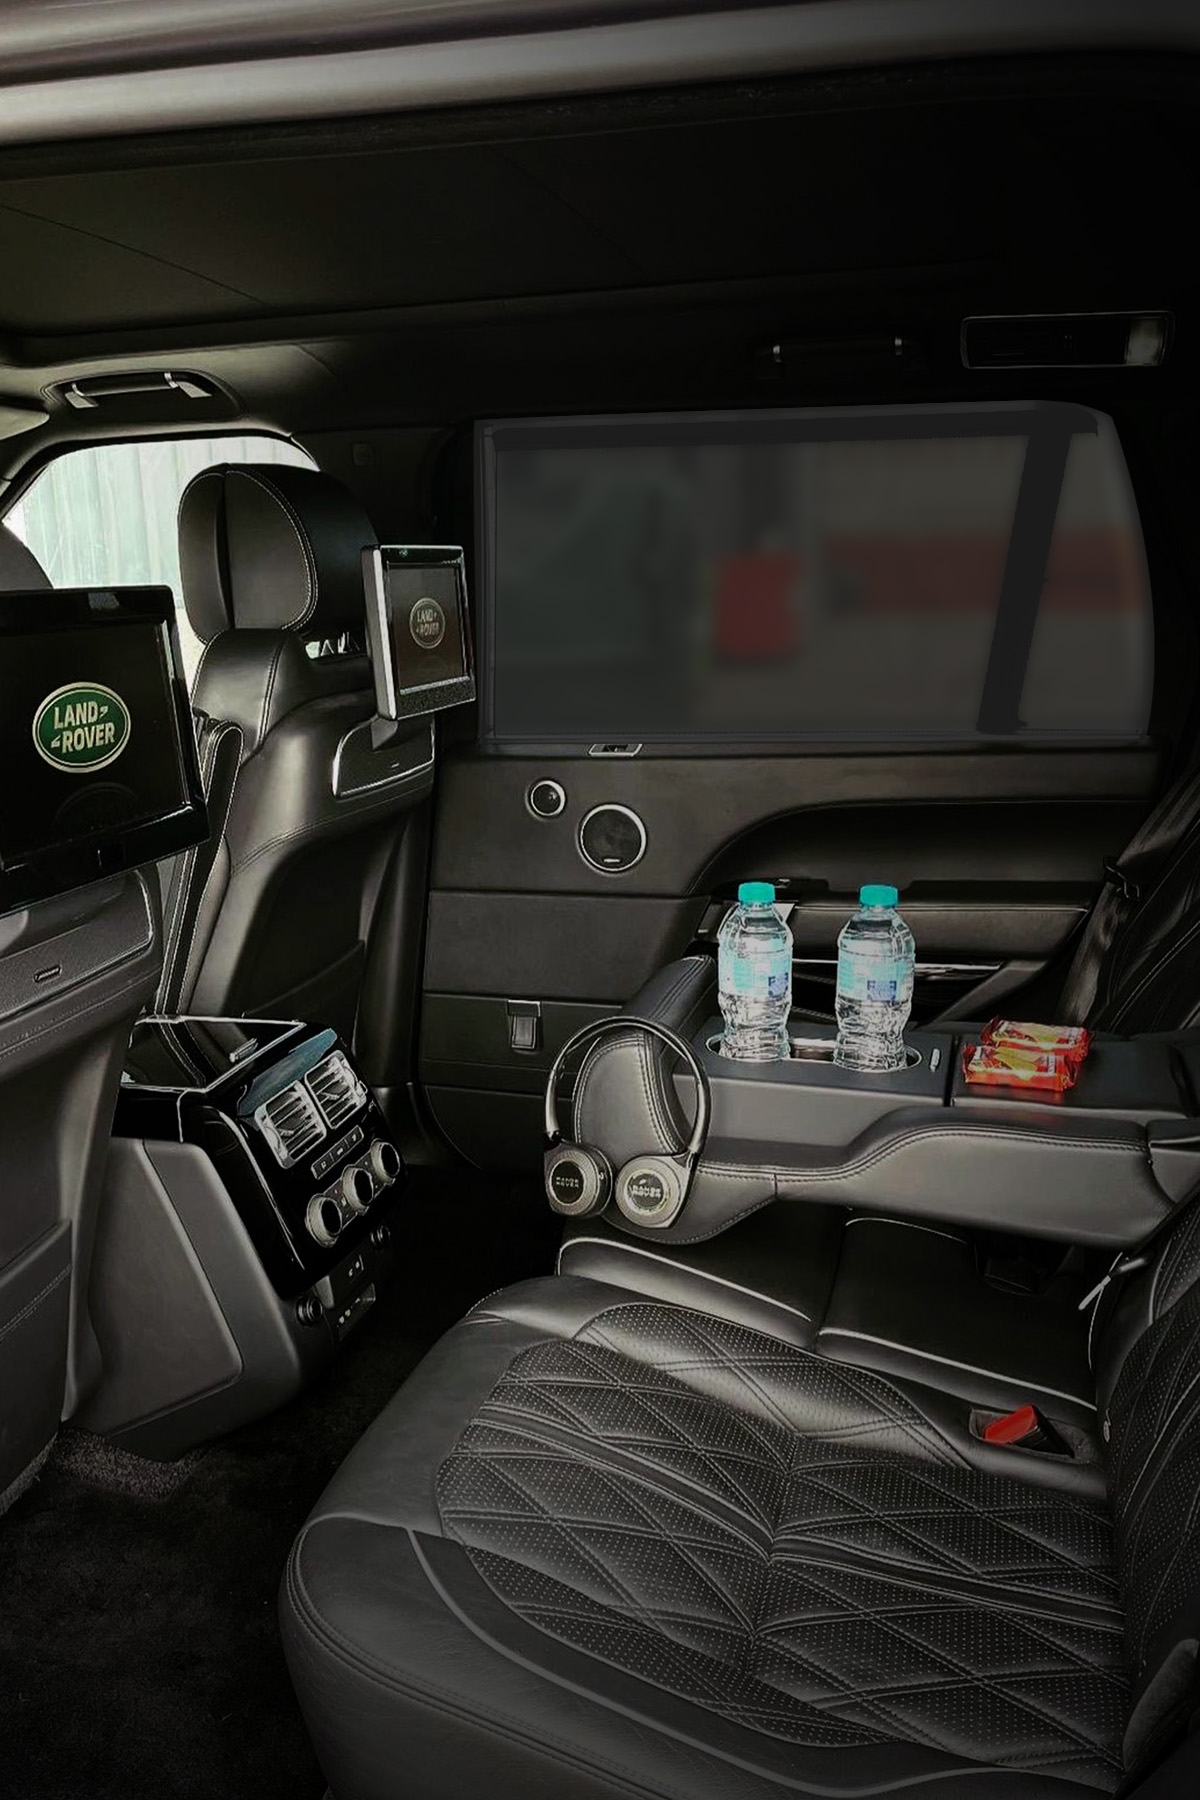 Luxury Back Seats with TV's - Luxe Scot